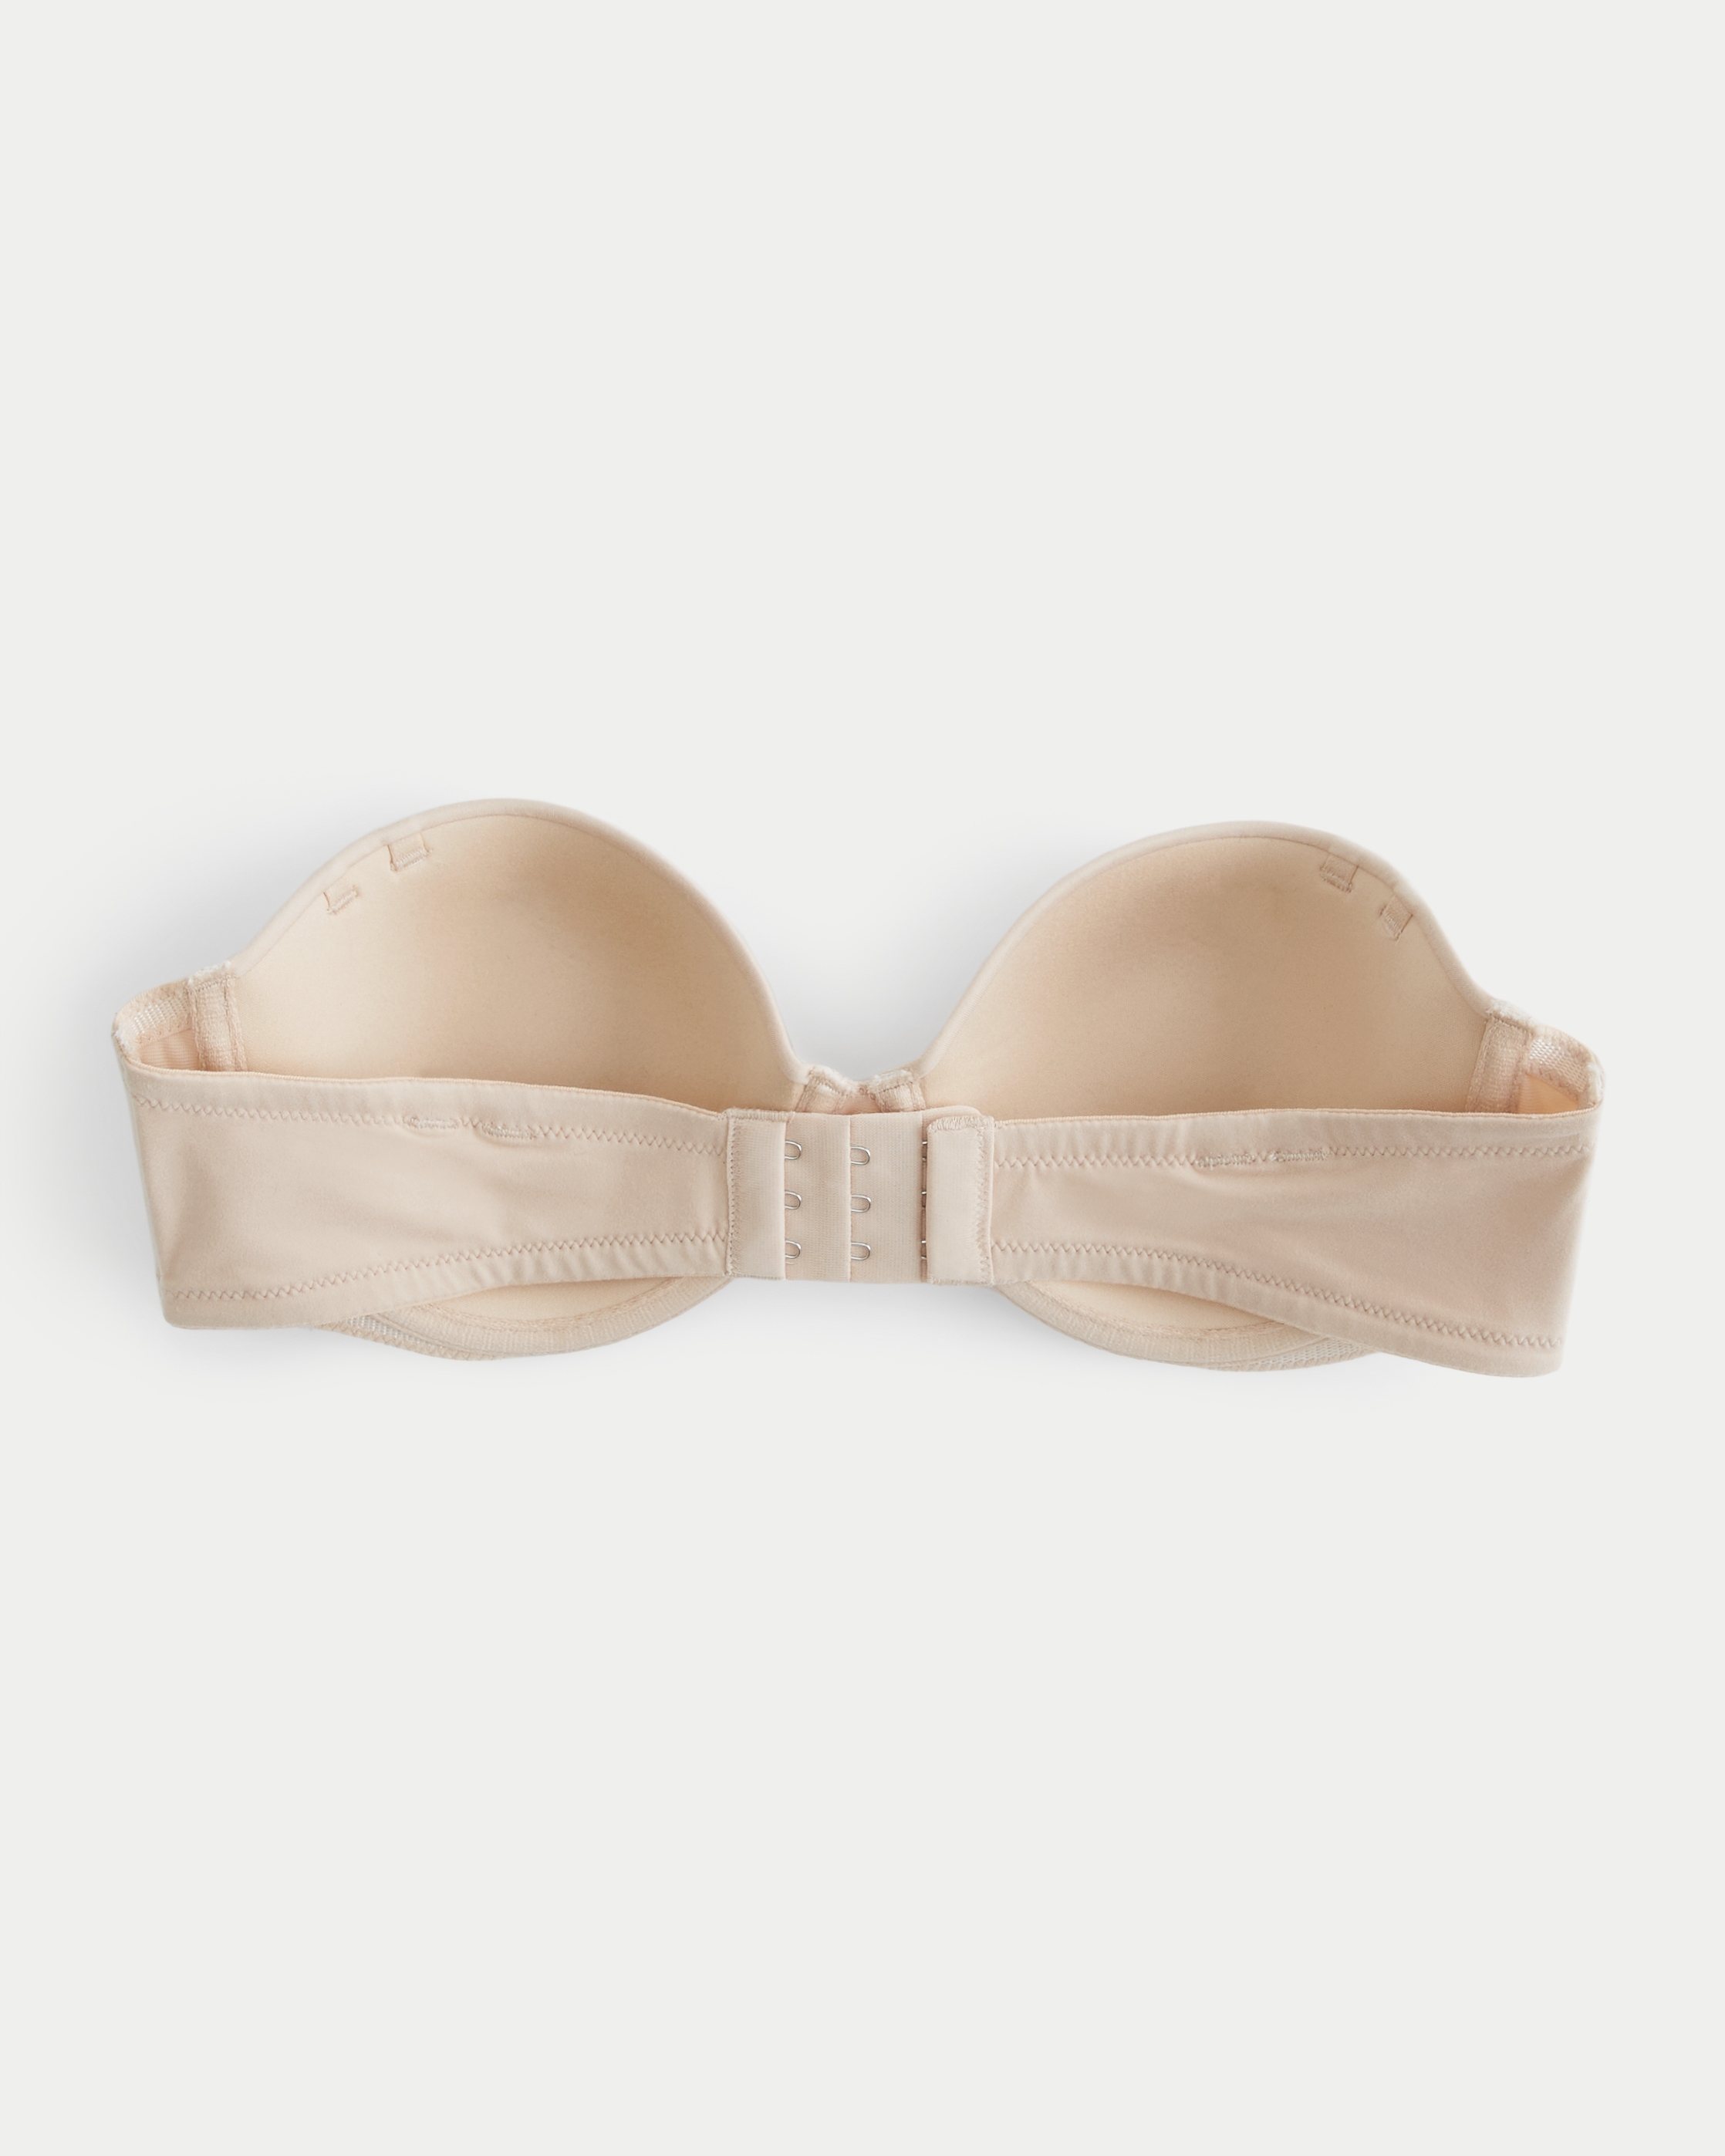 Gilly Hicks Hollister Memory Foam Bra White Push Up Padded Wired